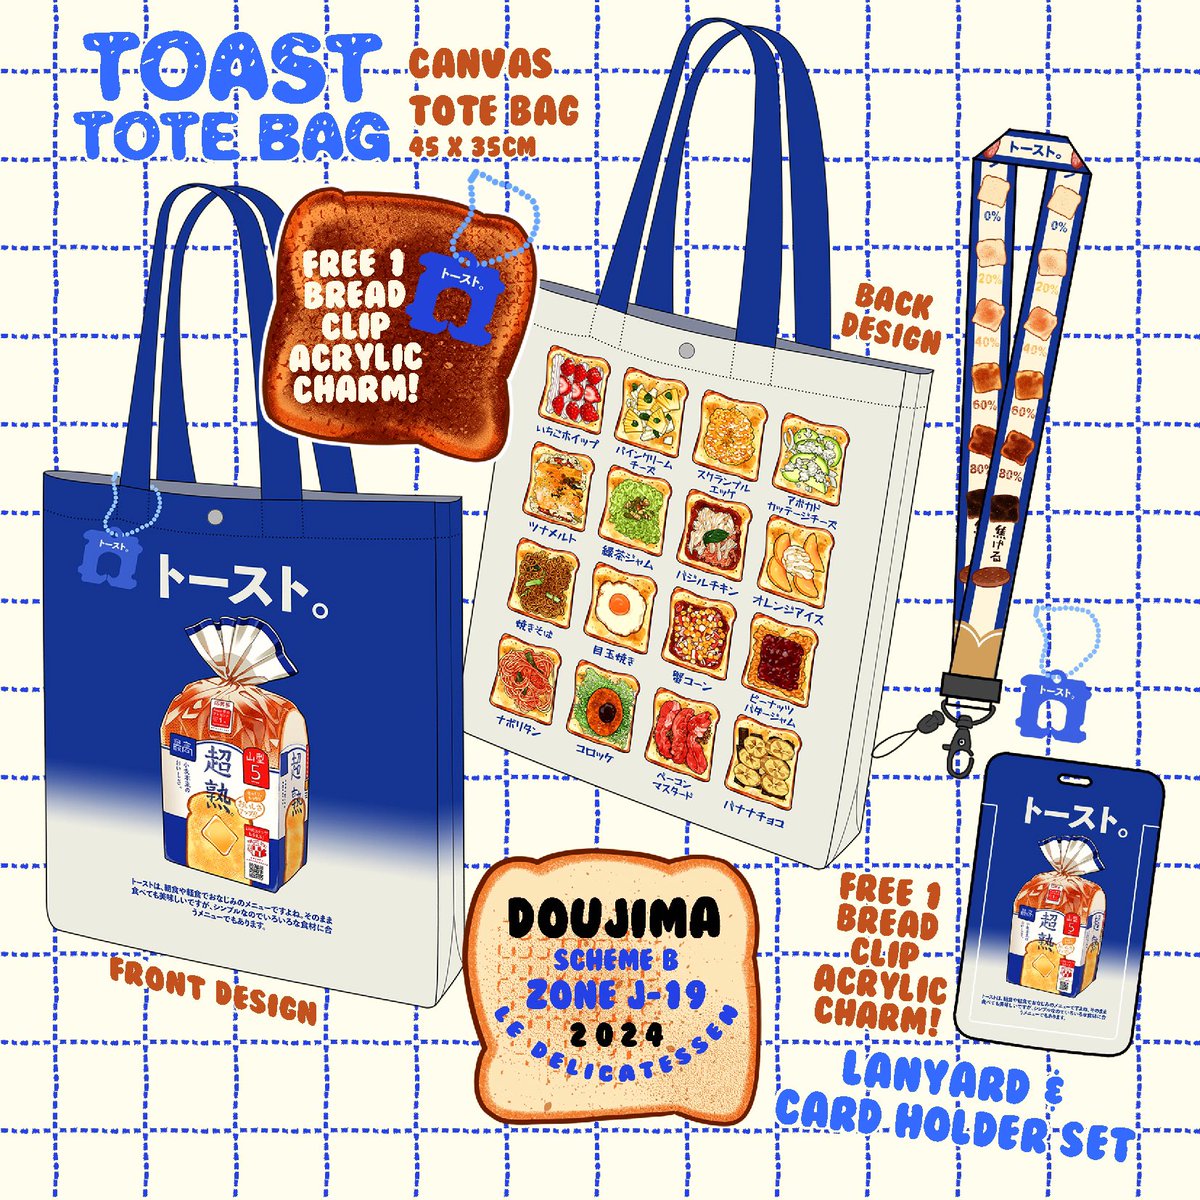 Hi!! 
I’ll be boothing at Doujima this coming Saturday and Sunday (11-12 May) at Singapore! My booth is J-19. If you are interested, you can browse more of my products list at the comment 🍞🍞🍞